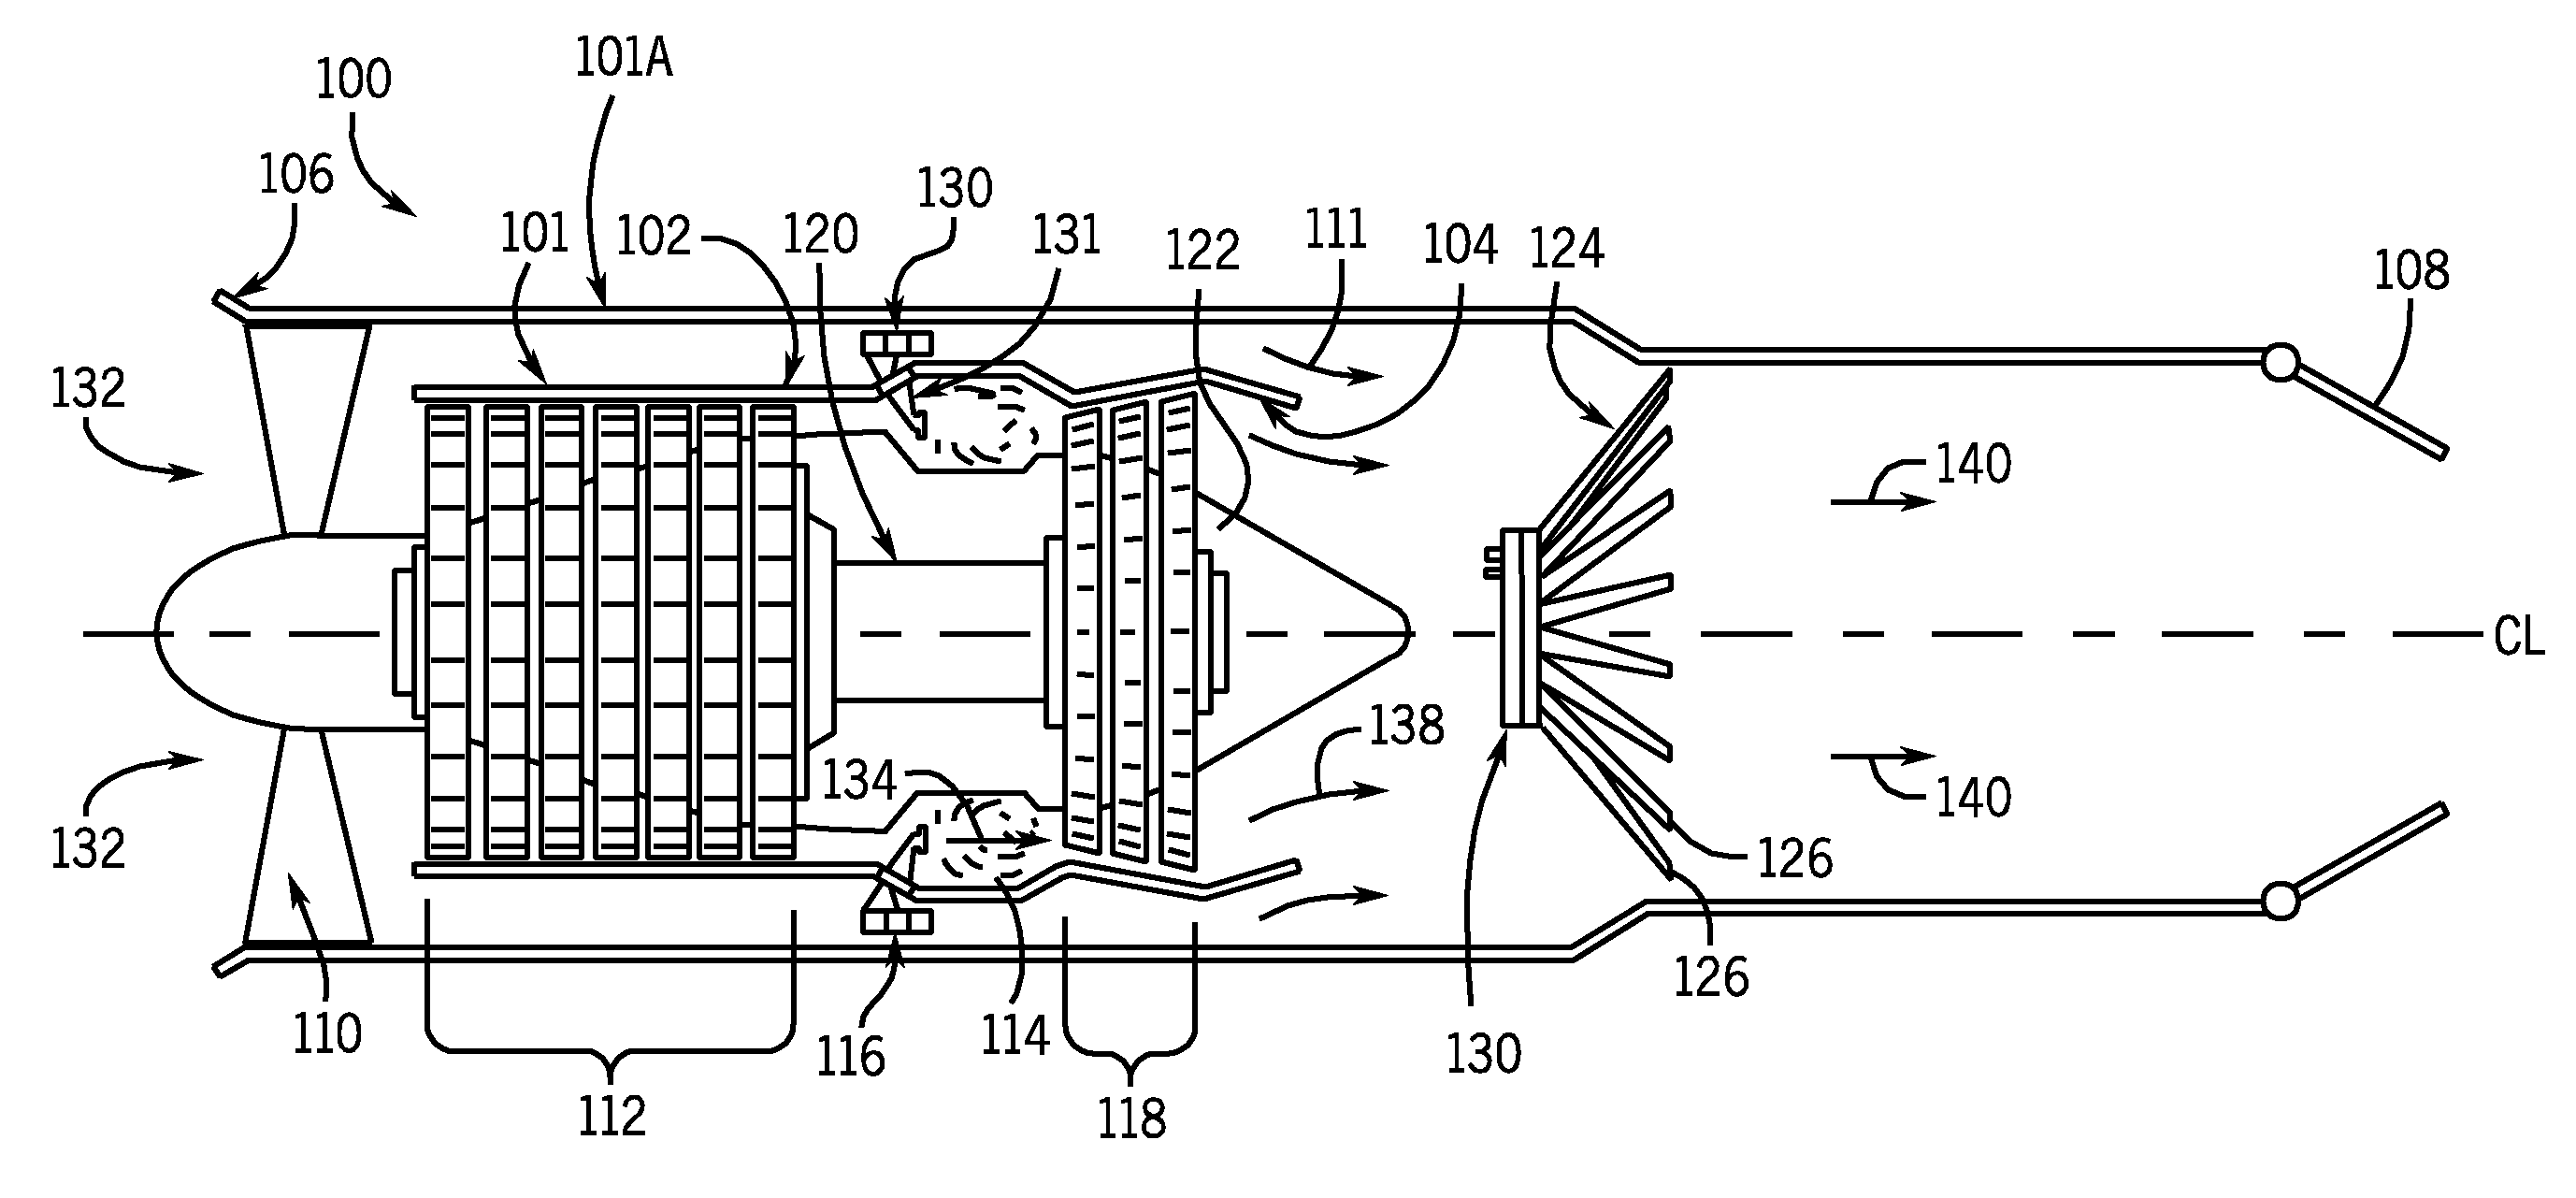 Multi Passage Fuel Manifold and Methods of Construction